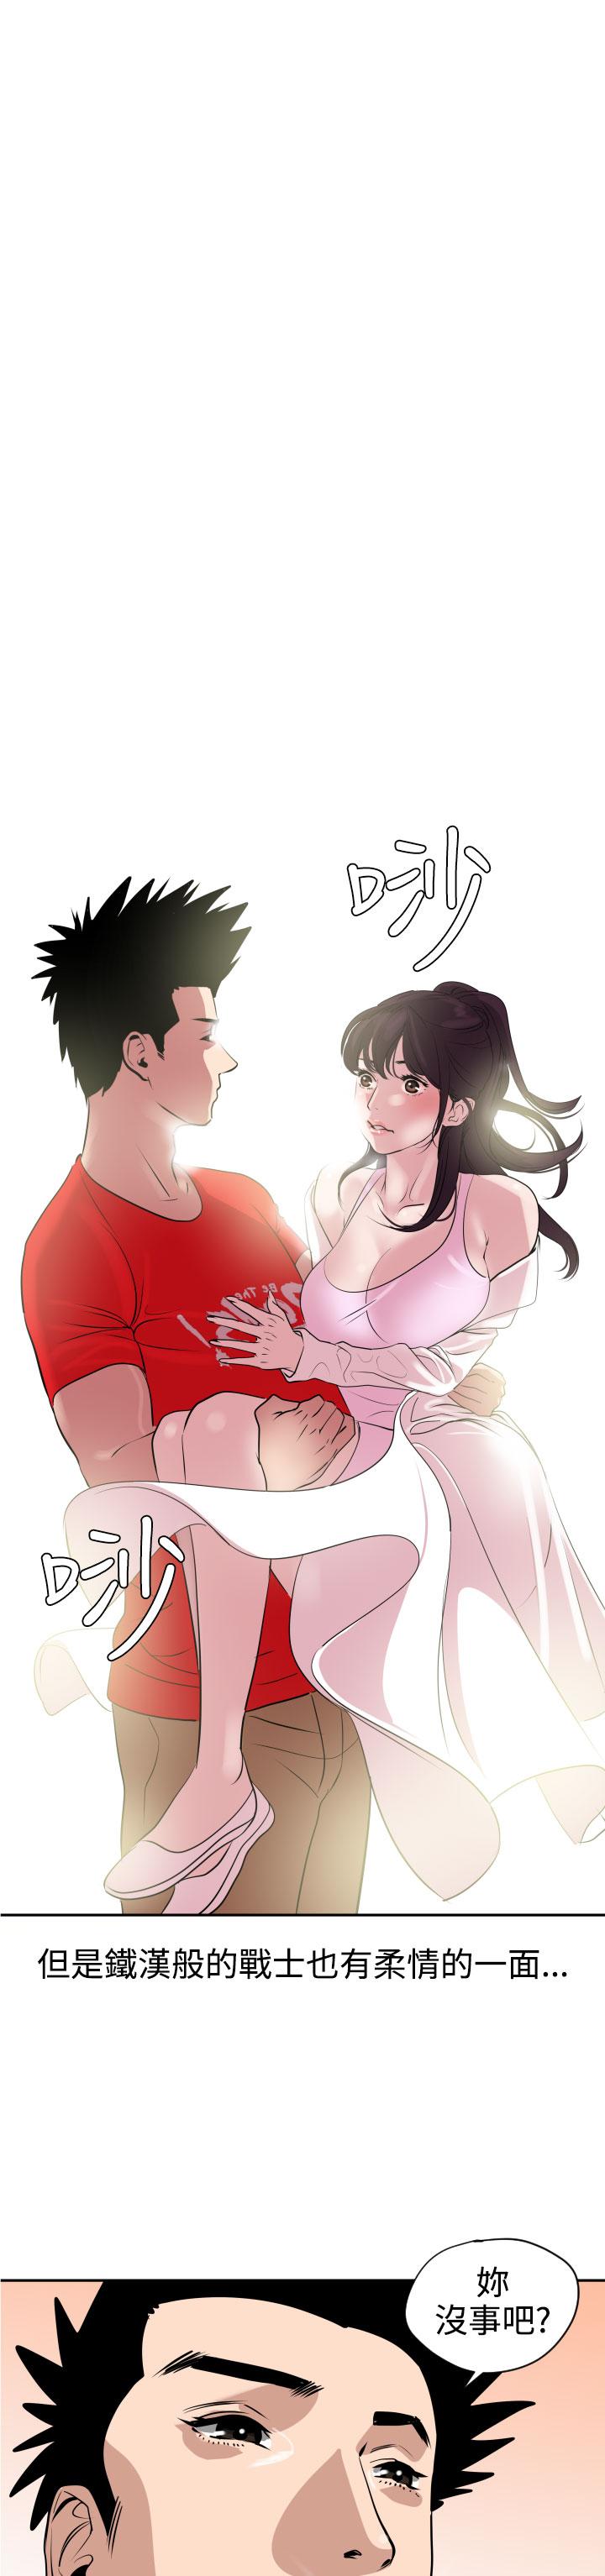 Desire King (慾求王) Ch.1-16 (chinese) 302